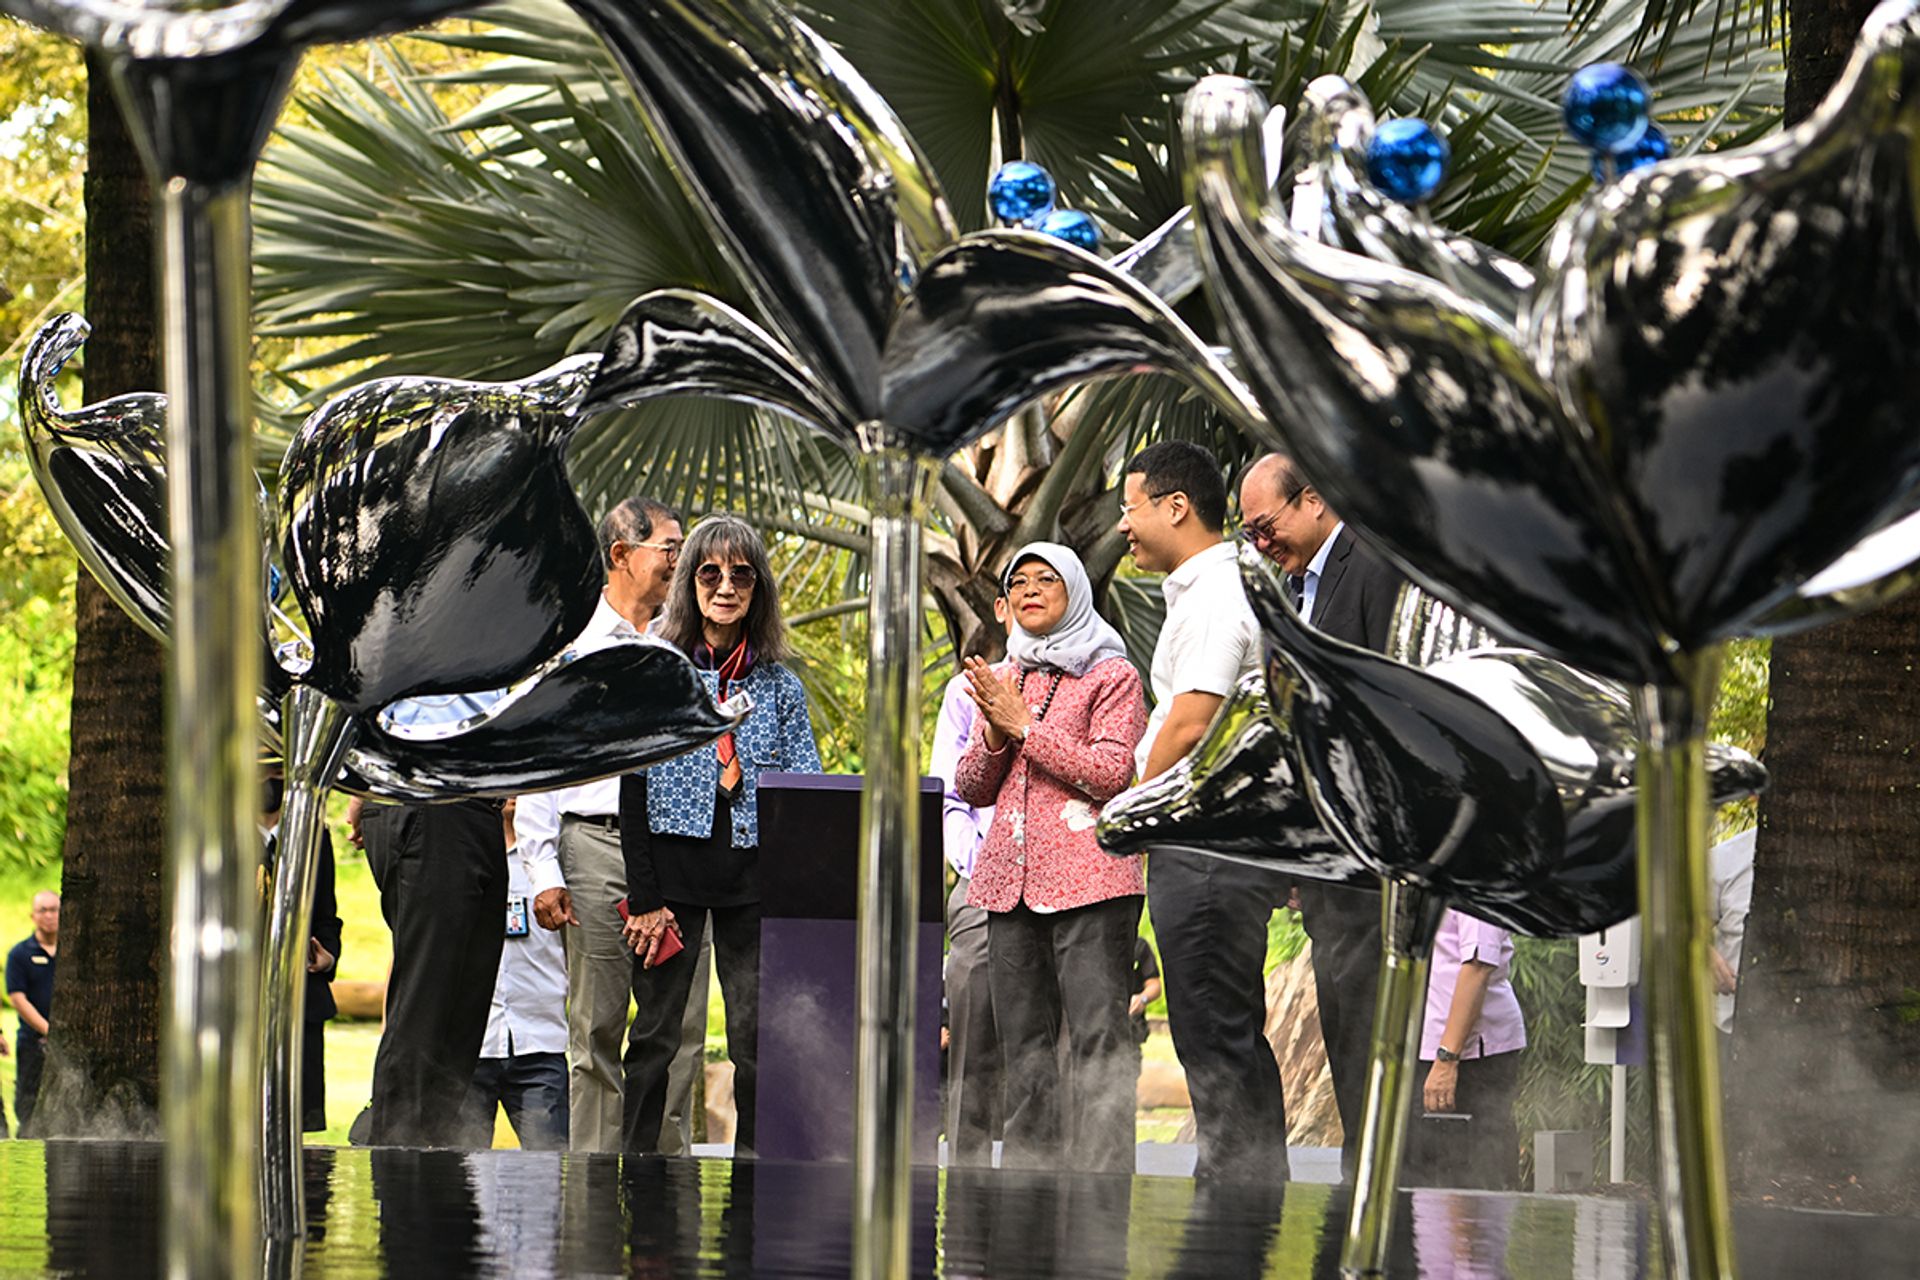 (From left) President Halimah viewing the Perpetual Blooms sculpture by Cultural Medallion recipient Han Sai Por (in sunglasses) with Minister for National Development Desmond Lee (second from right) and sculpture donor Tan Aik Hock (right) on Nov 9, 2022. The artwork commemorates Gardens by the Bay’s 10th anniversary. ST PHOTO: LIM YAOHUI